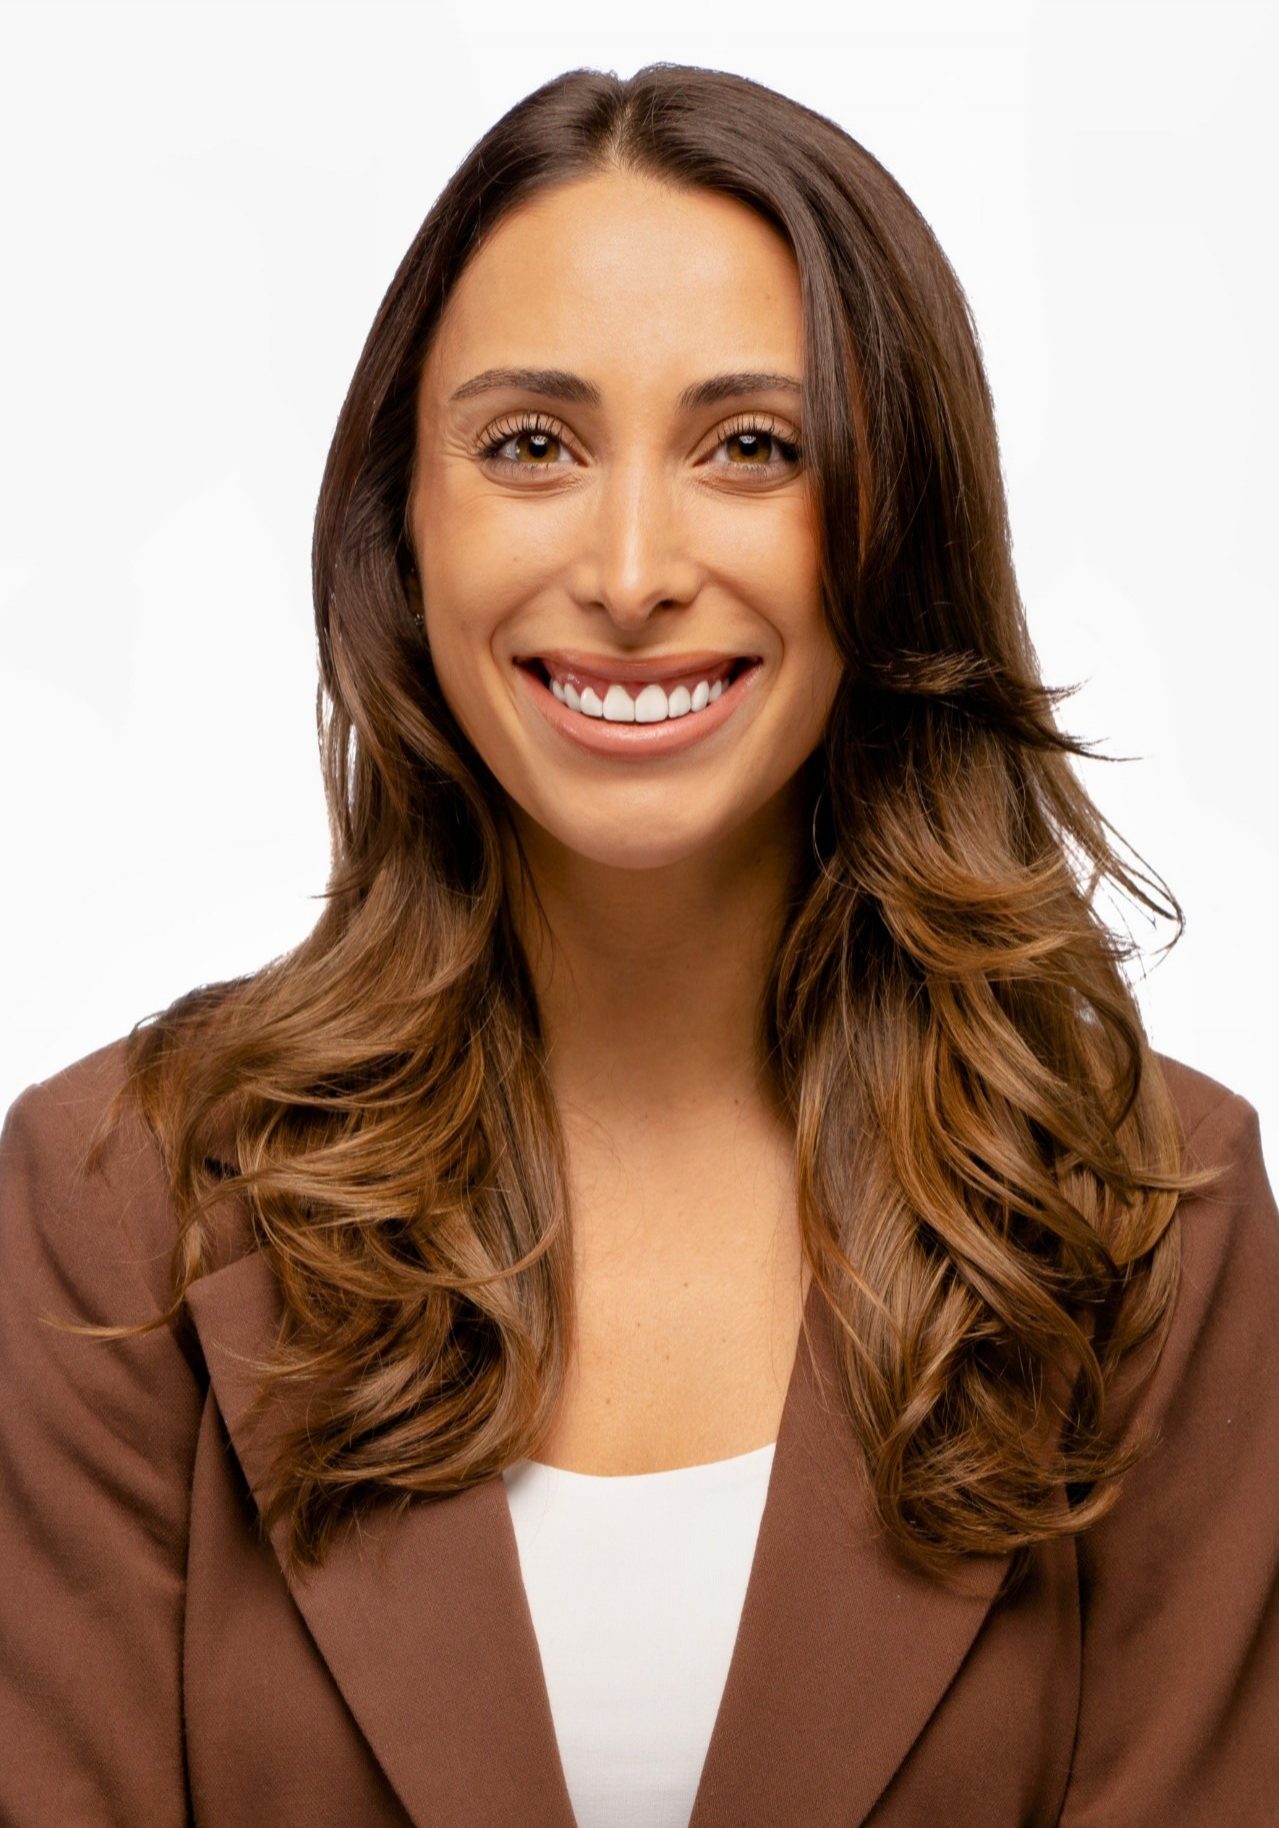 Alexandra Silano real estate agent and team member of The ONE94 Group